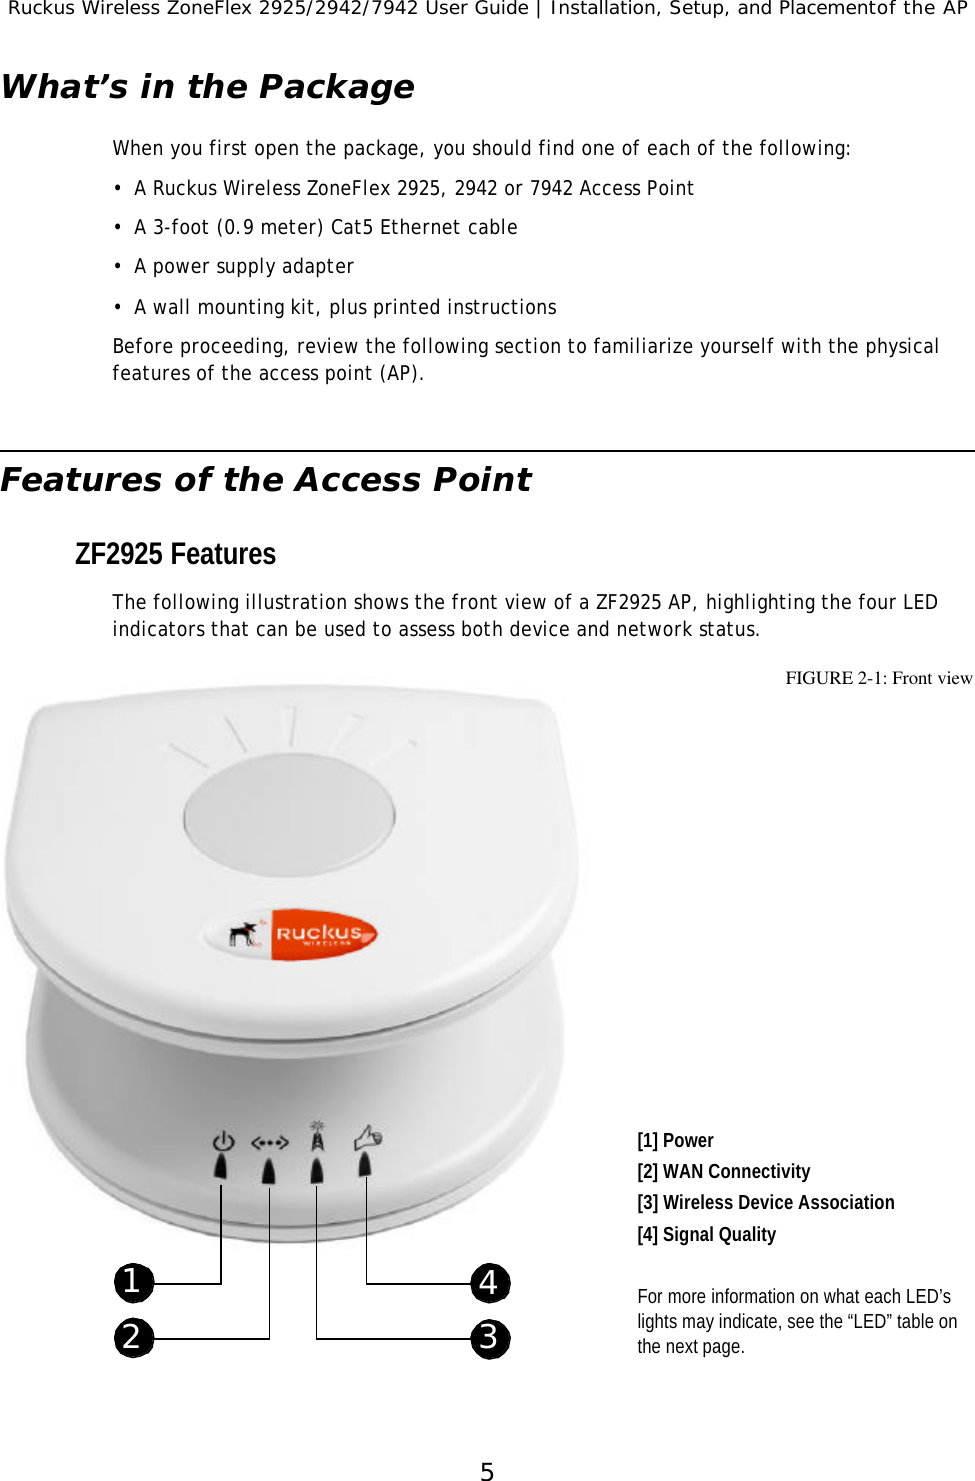 Ruckus Wireless ZoneFlex 2925/2942/7942 User Guide | Installation, Setup, and Placementof the AP5What’s in the PackageWhen you first open the package, you should find one of each of the following:•A Ruckus Wireless ZoneFlex 2925, 2942 or 7942 Access Point•A 3-foot (0.9 meter) Cat5 Ethernet cable •A power supply adapter•A wall mounting kit, plus printed instructionsBefore proceeding, review the following section to familiarize yourself with the physical features of the access point (AP).Features of the Access PointZF2925 FeaturesThe following illustration shows the front view of a ZF2925 AP, highlighting the four LED indicators that can be used to assess both device and network status.  FIGURE 2-1: Front view[1] Power[2] WAN Connectivity[3] Wireless Device Association[4] Signal QualityFor more information on what each LED’s lights may indicate, see the “LED” table on the next page.12 34